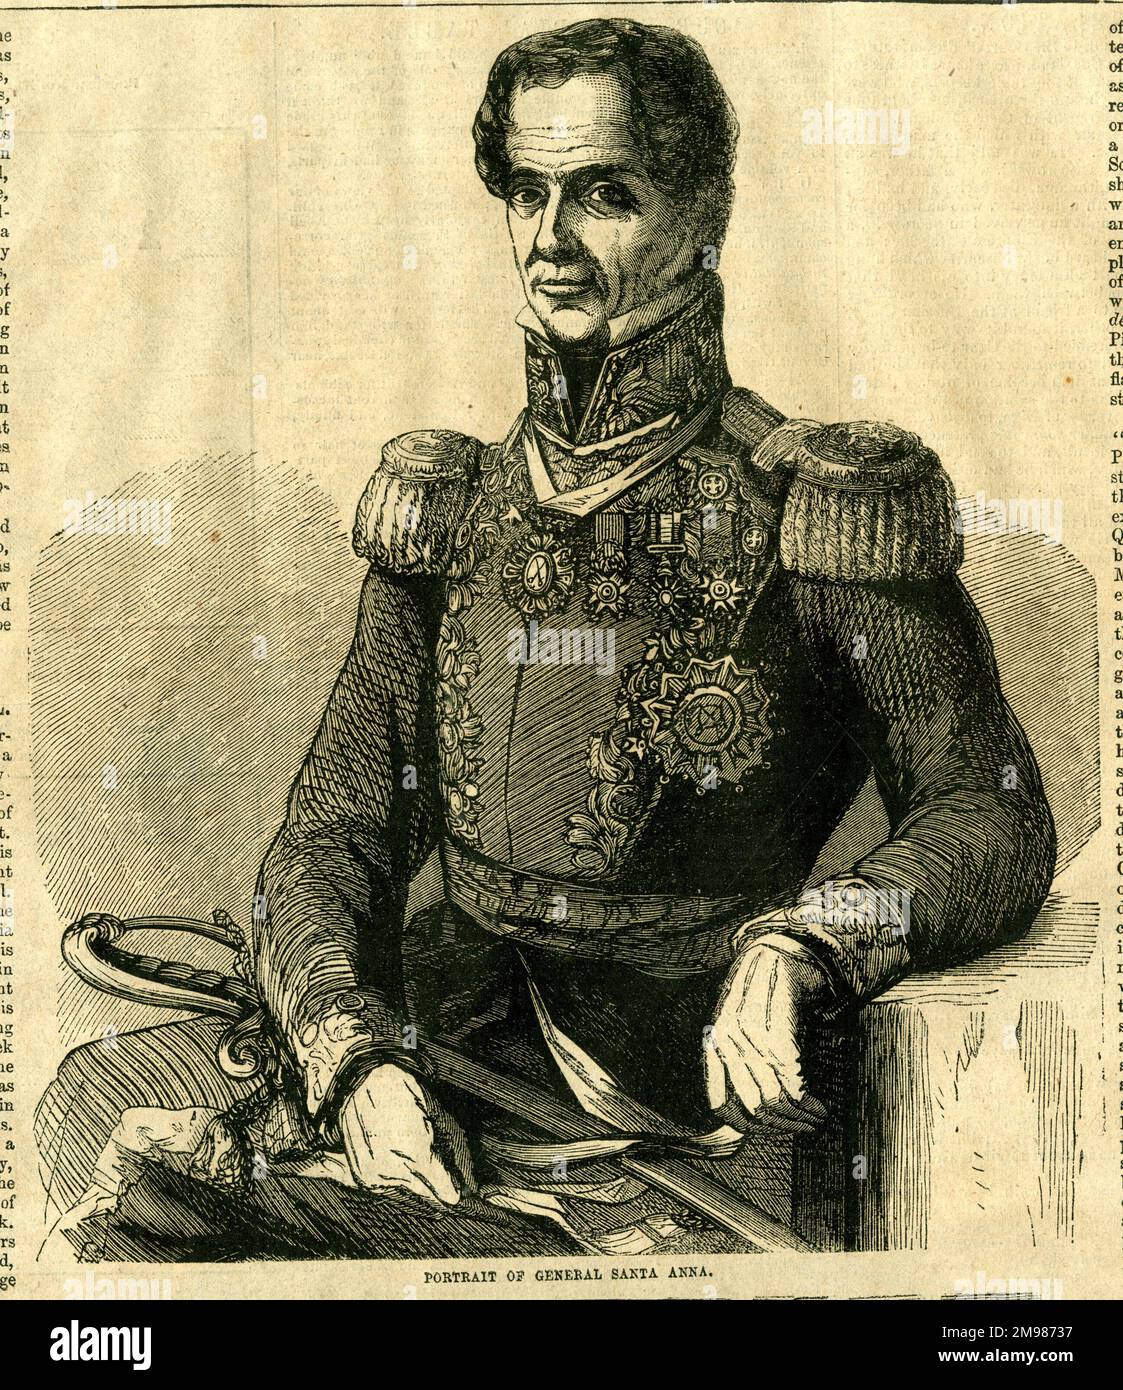 General Antonio Lopez de Santa Anna (1794-1876), 8th President of Mexico. After a successful political career he was overthrown in 1854 and lived most of his later years in exile. Stock Photo